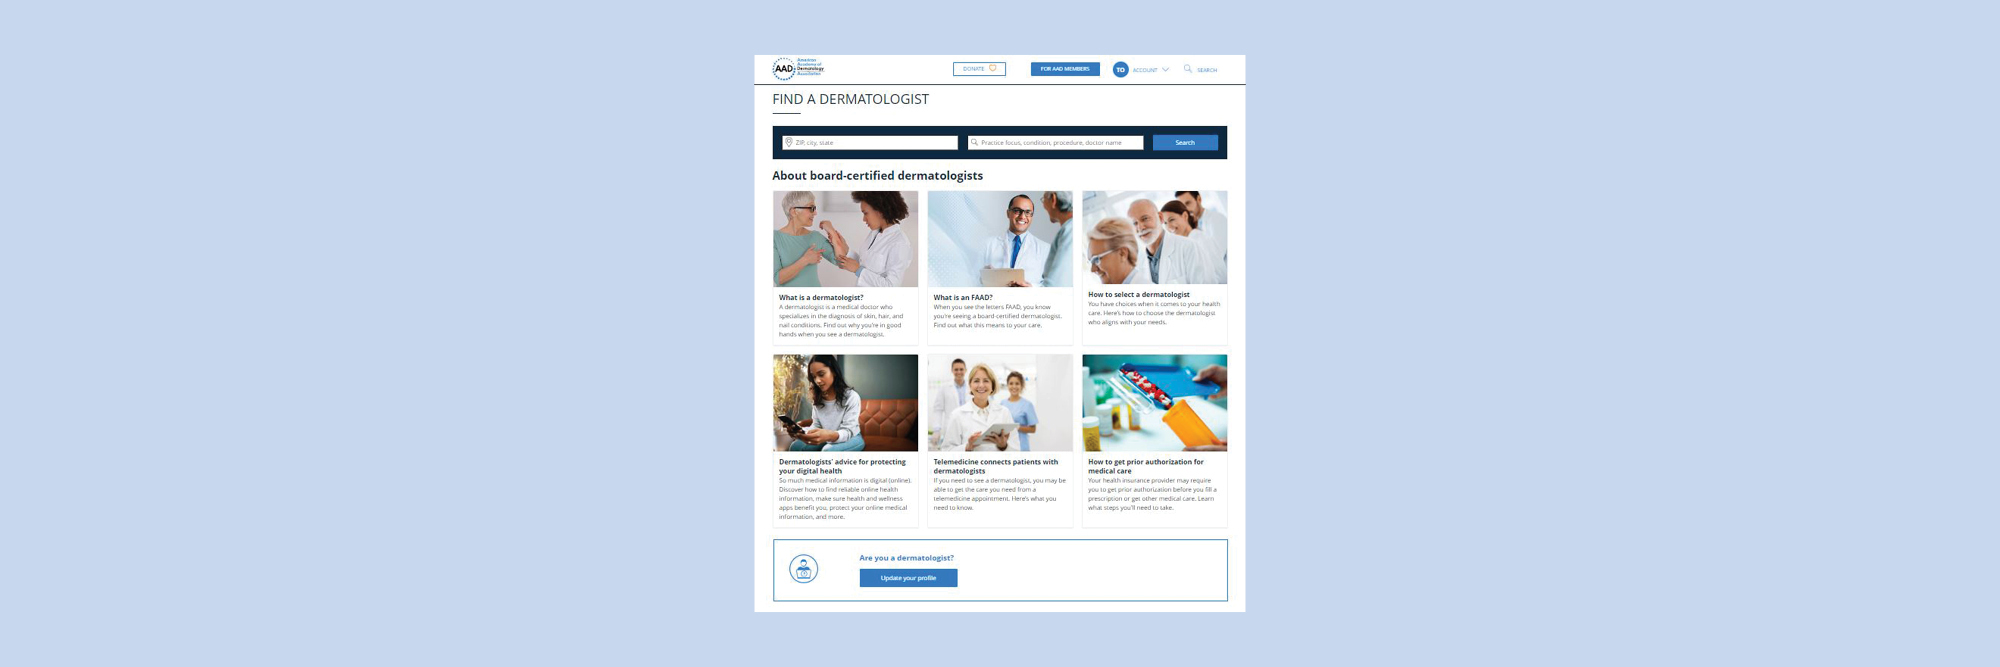 Banner illustration for Impact Report on Find a Dermatologist portal redesigned